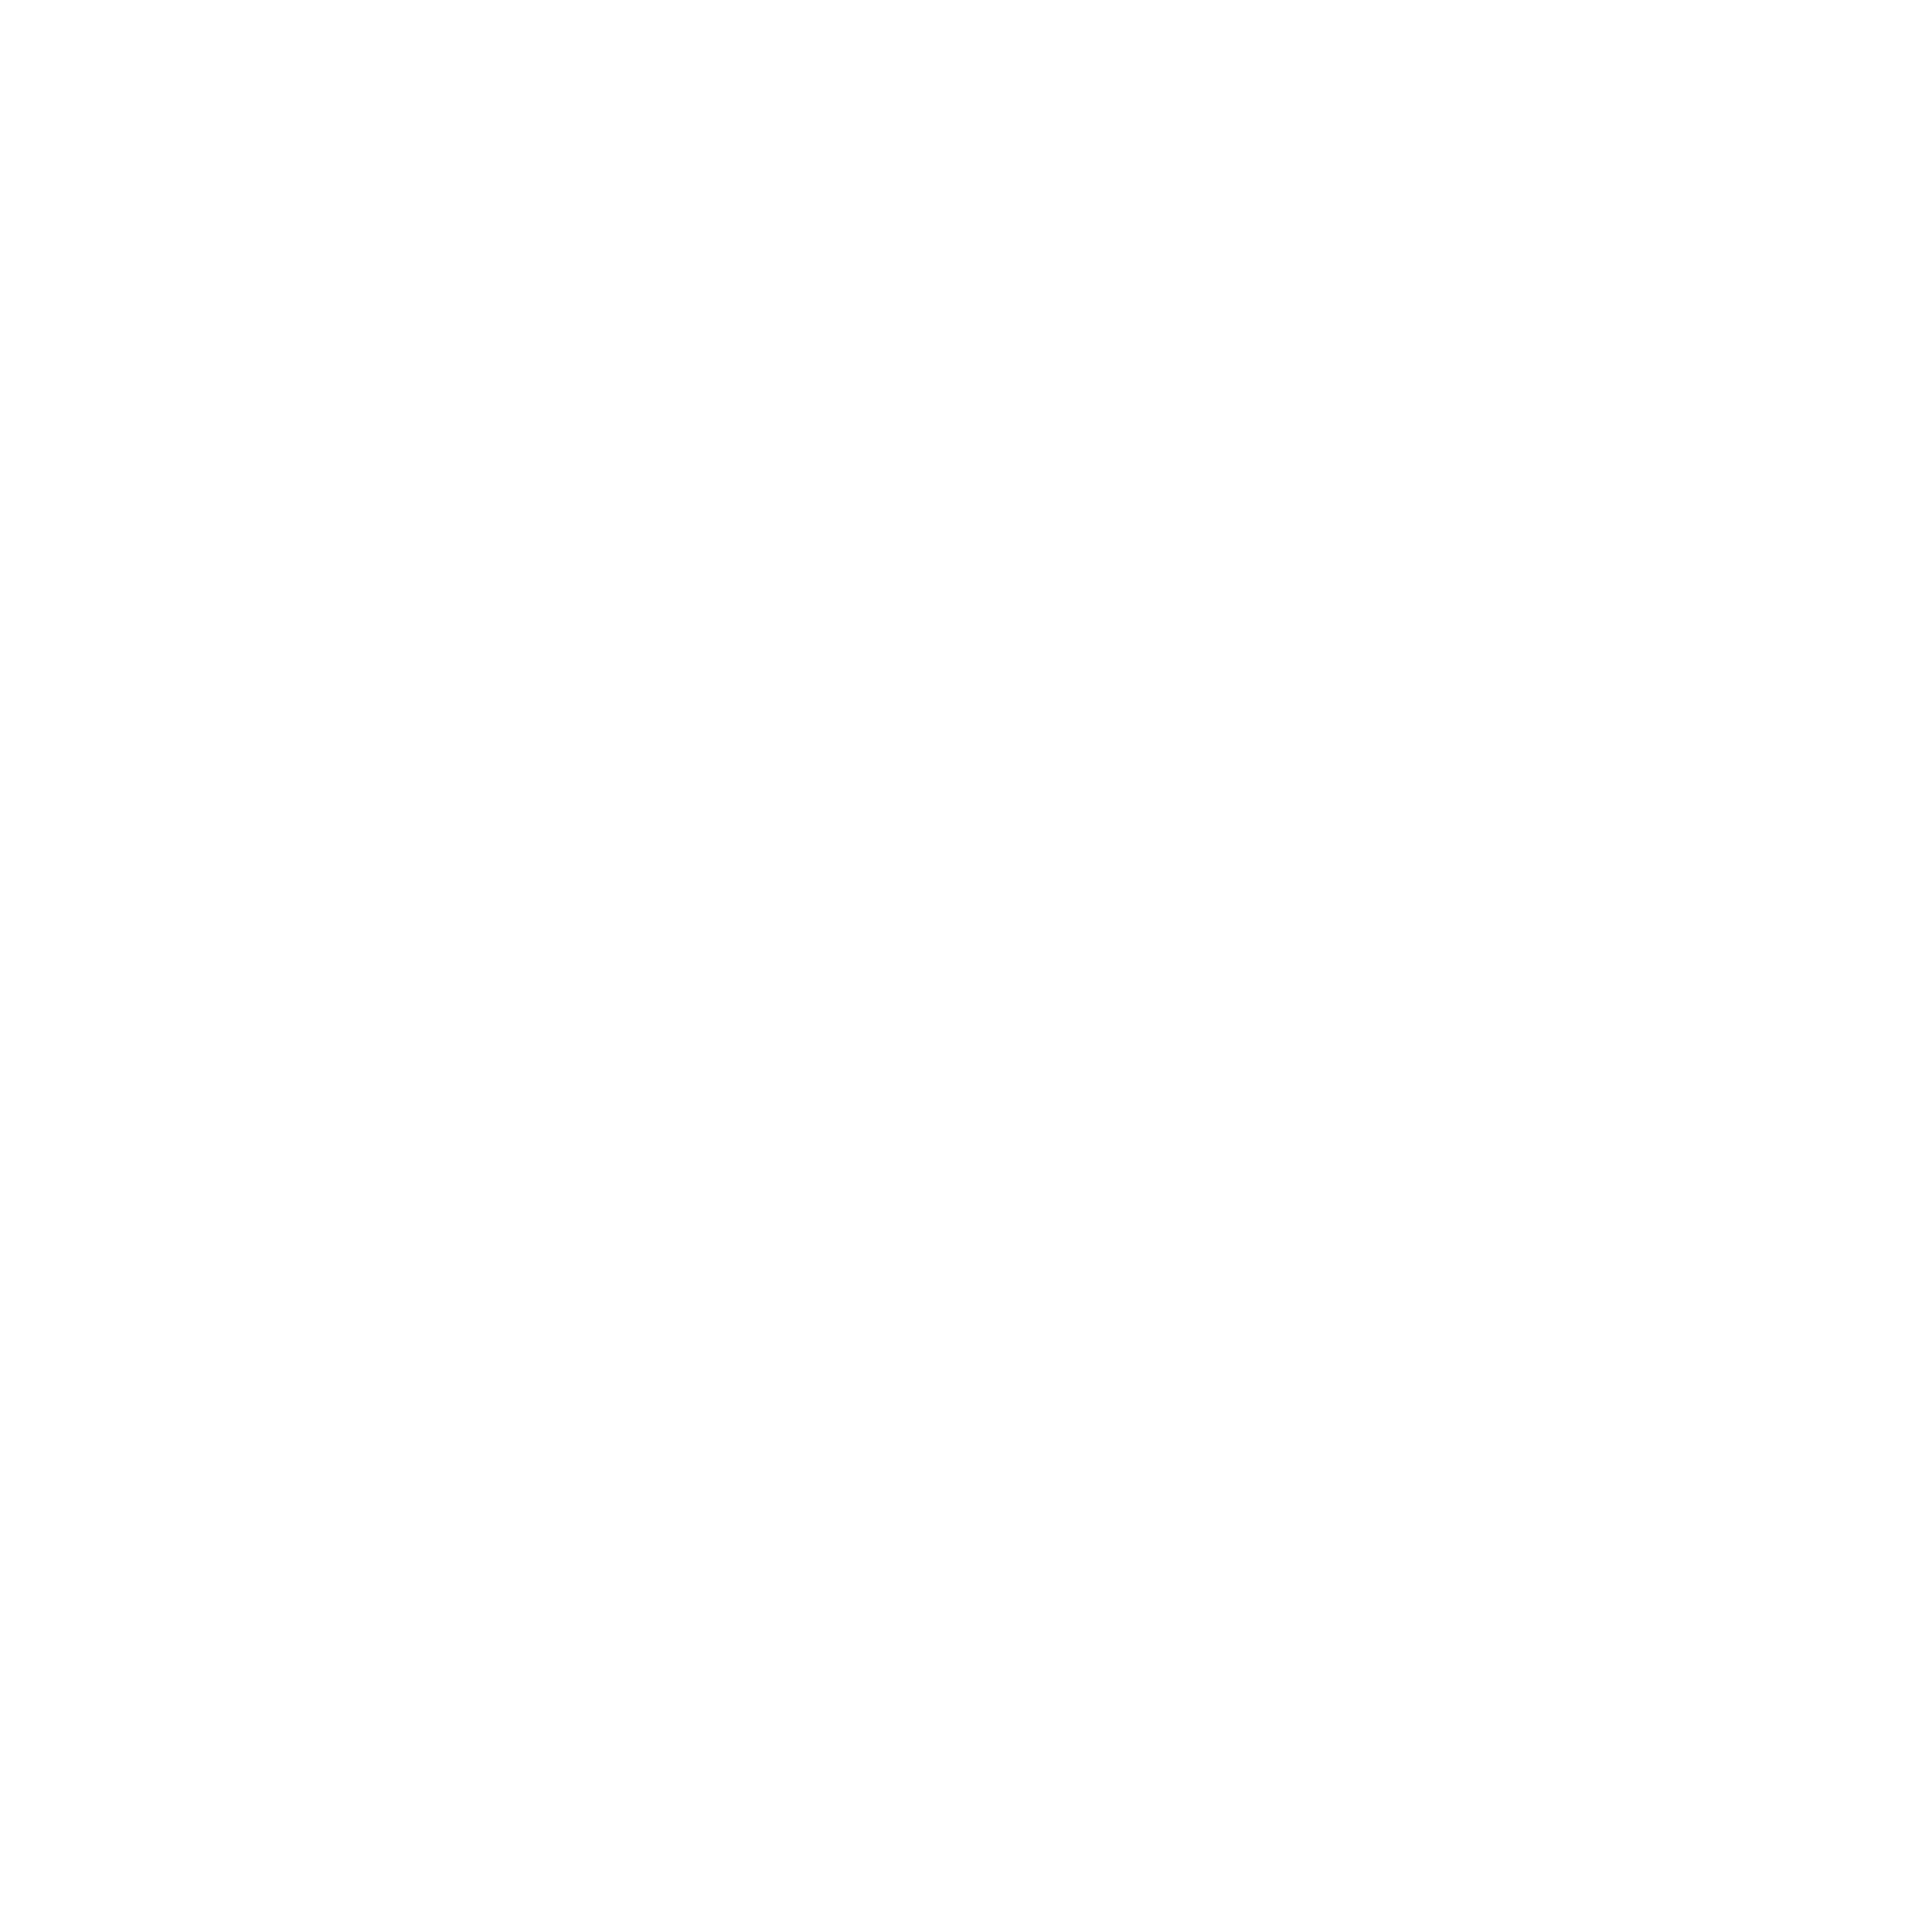 The 500 District